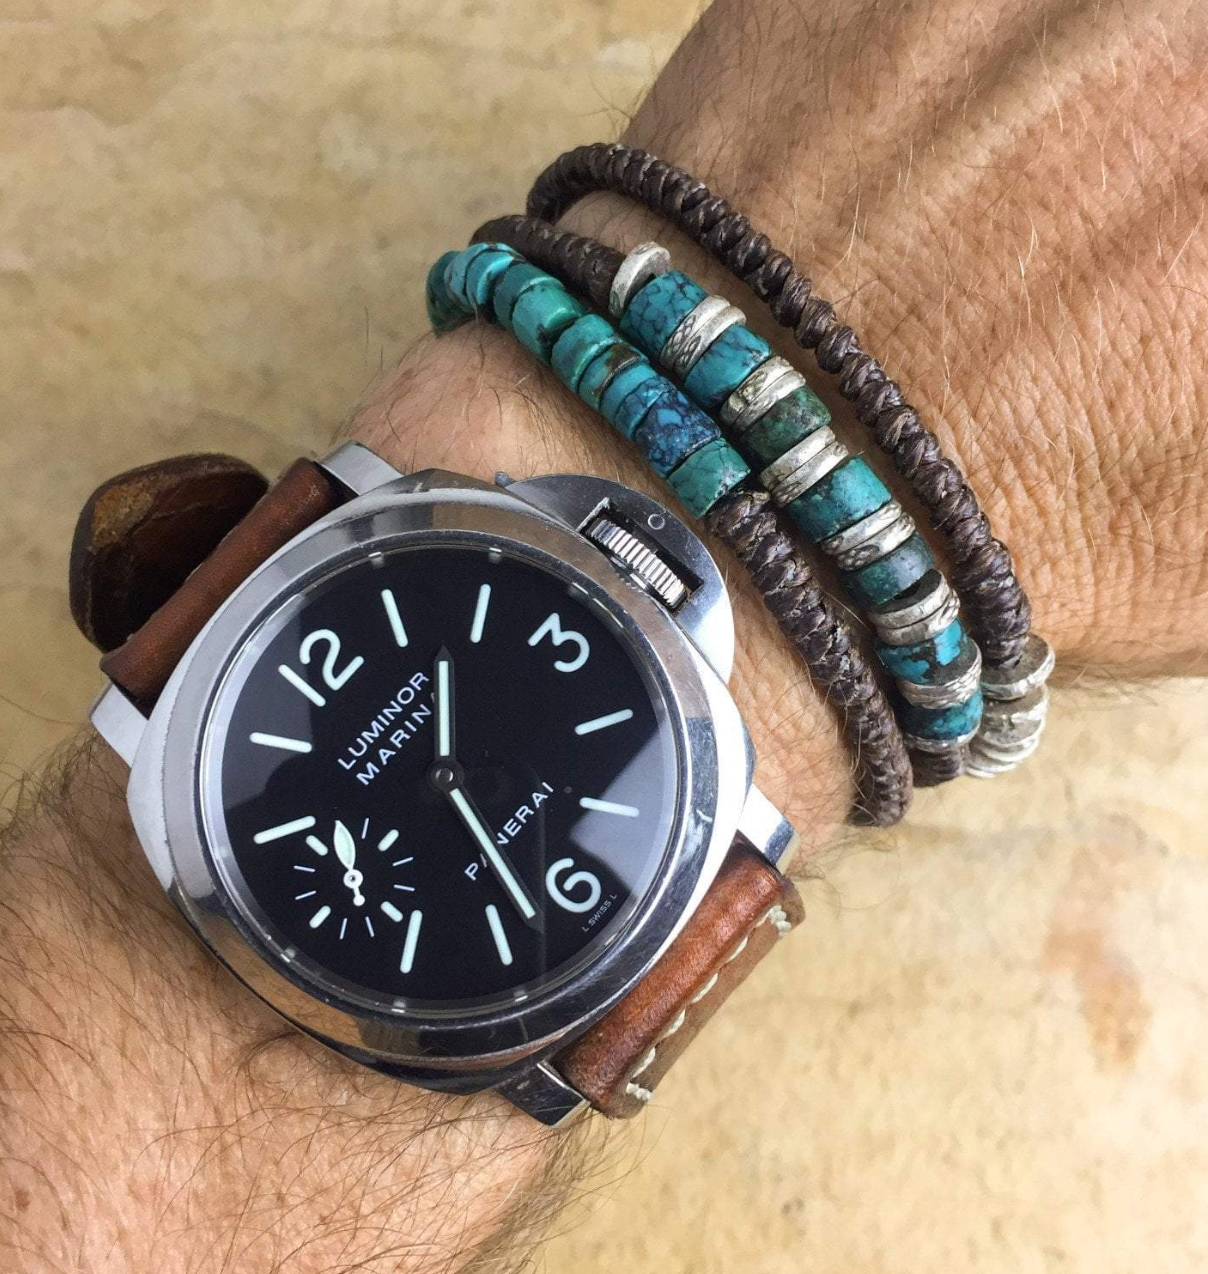 Mens Bracelets with Meaning: Wear True Values on Your Wrist